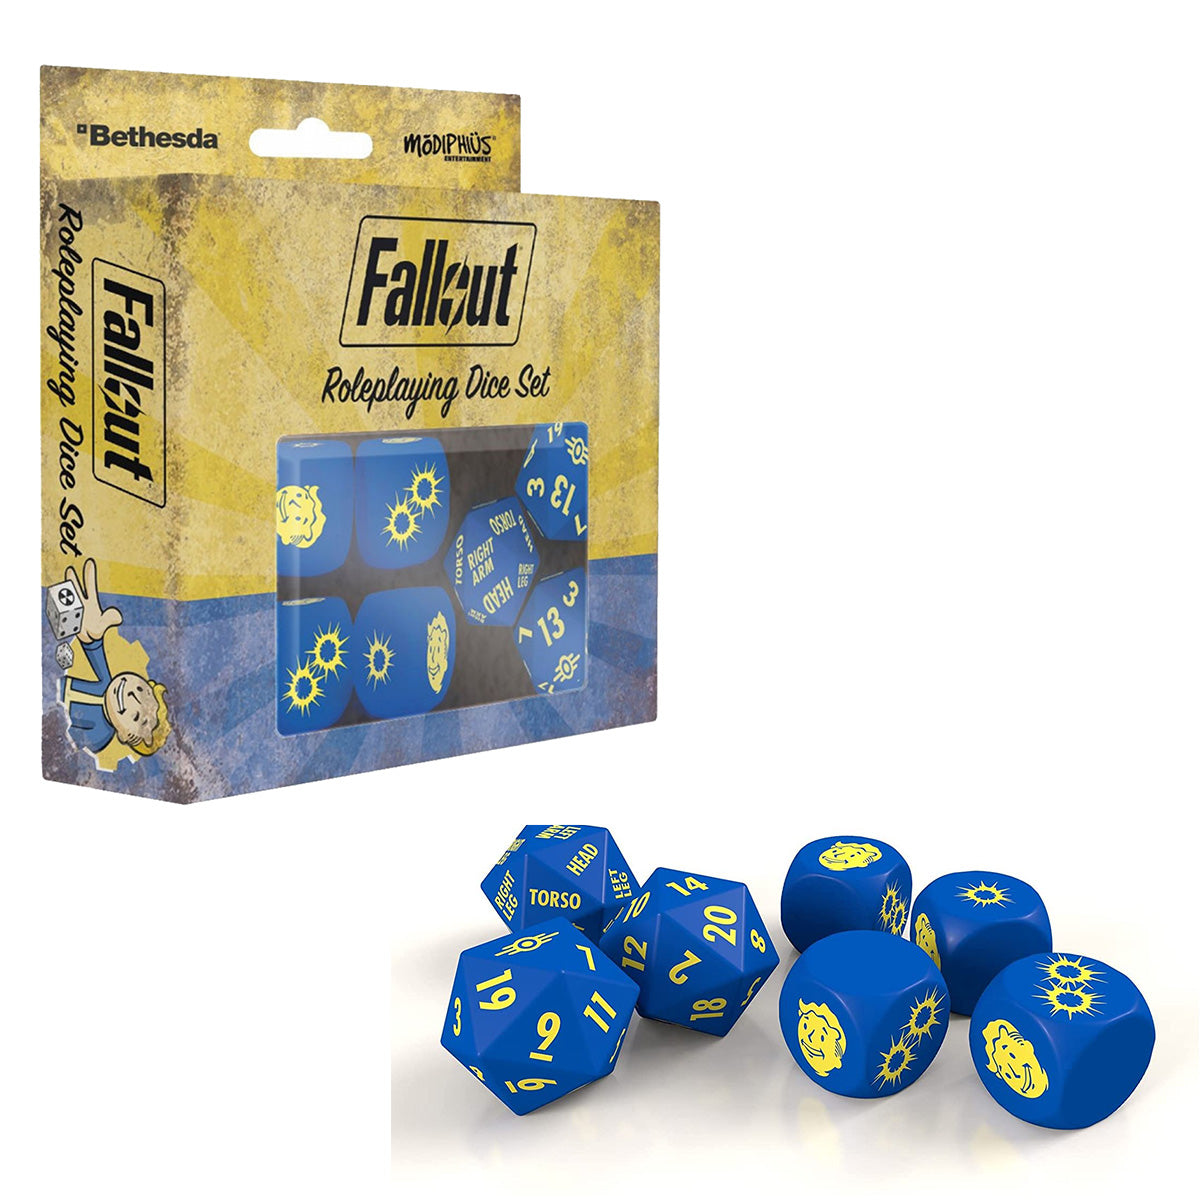 Fallout RPG Dice